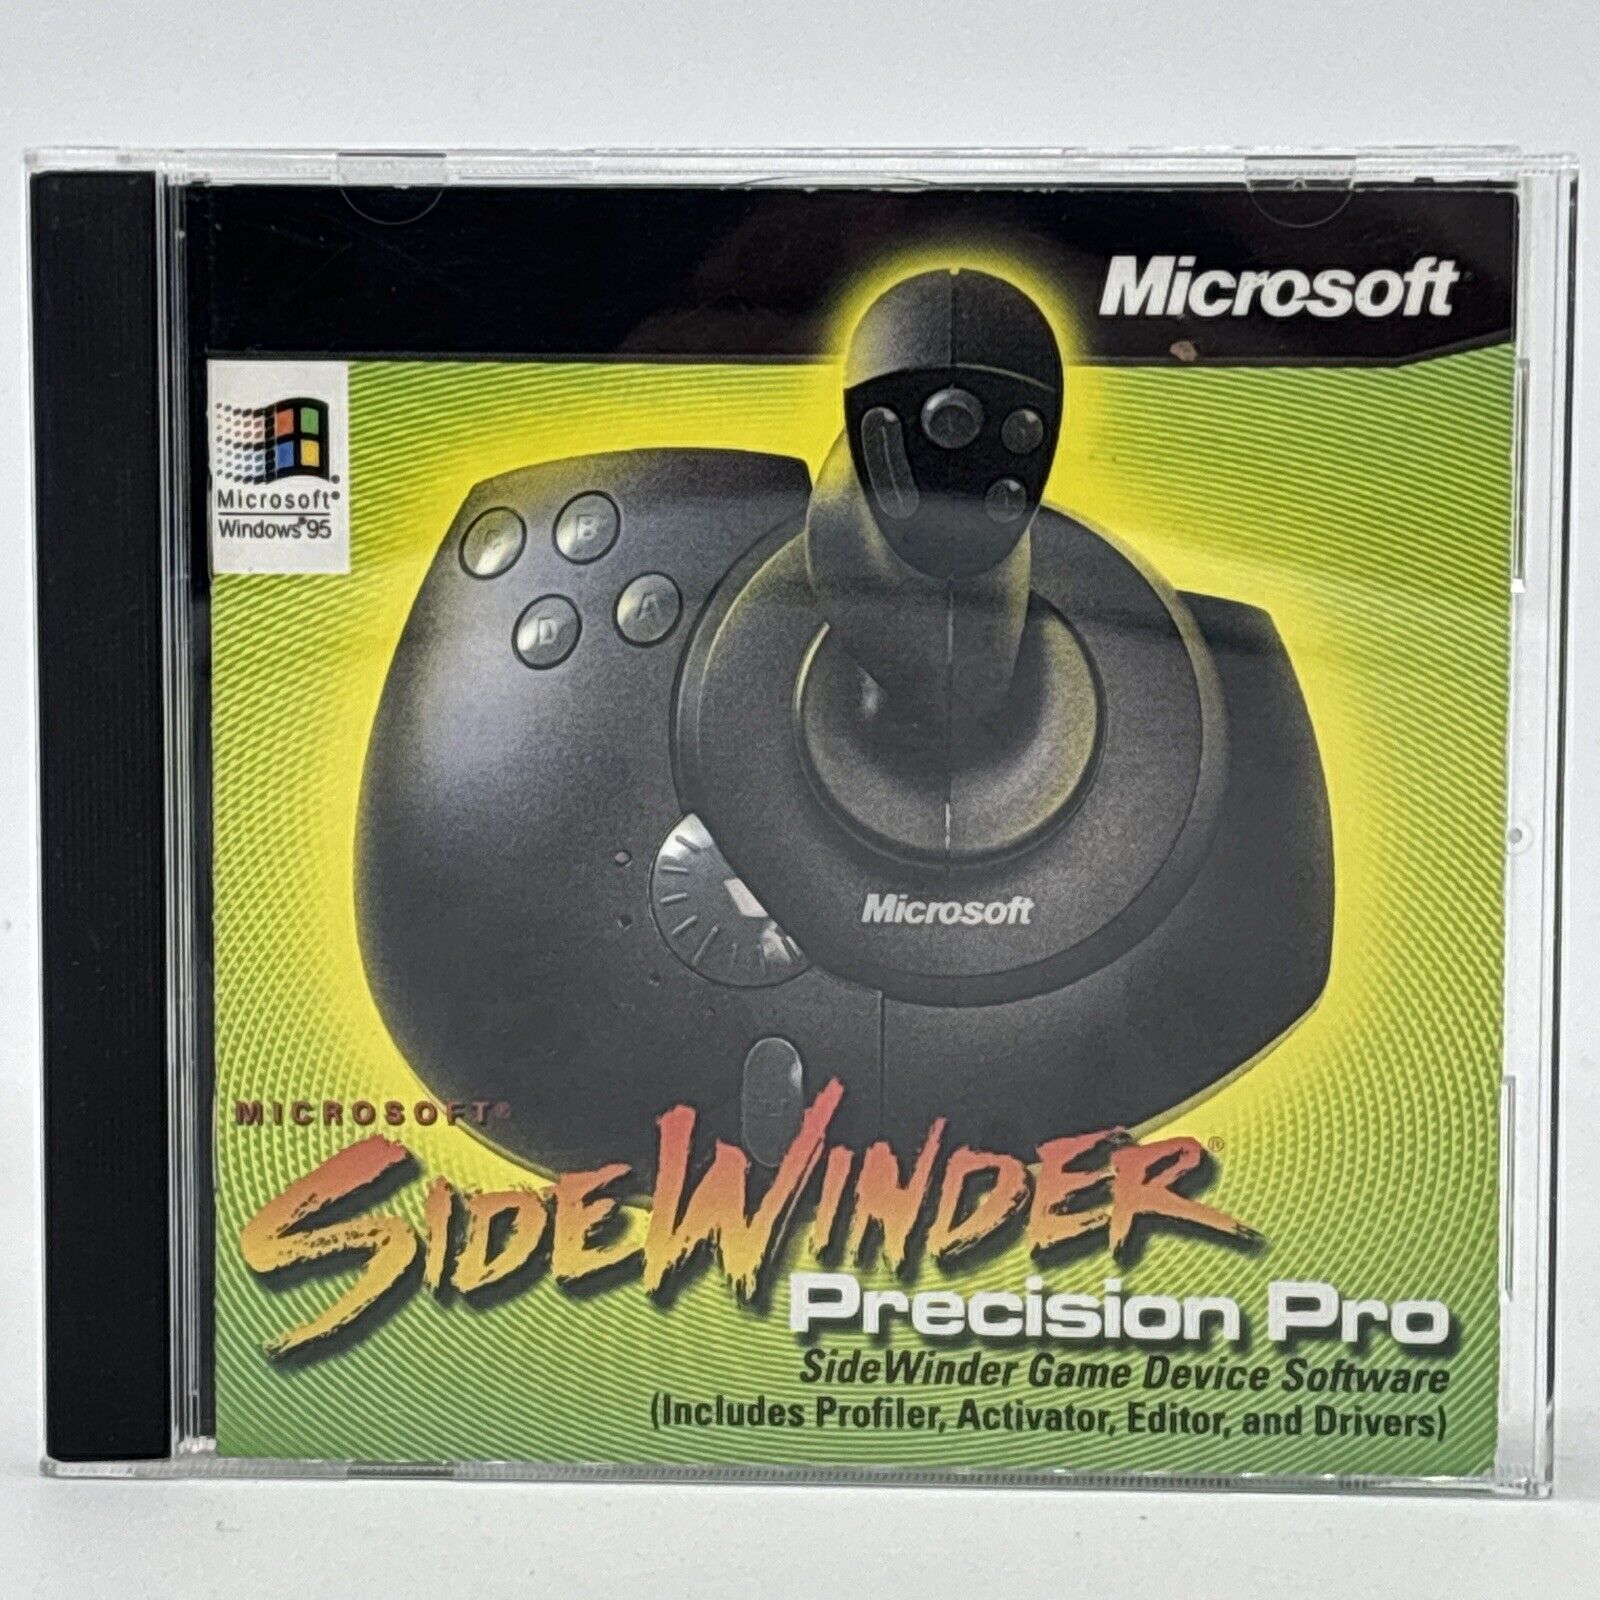 Microsoft SideWinder Precision Pro Game Device Software 2.0 Driver PC CD-ROM